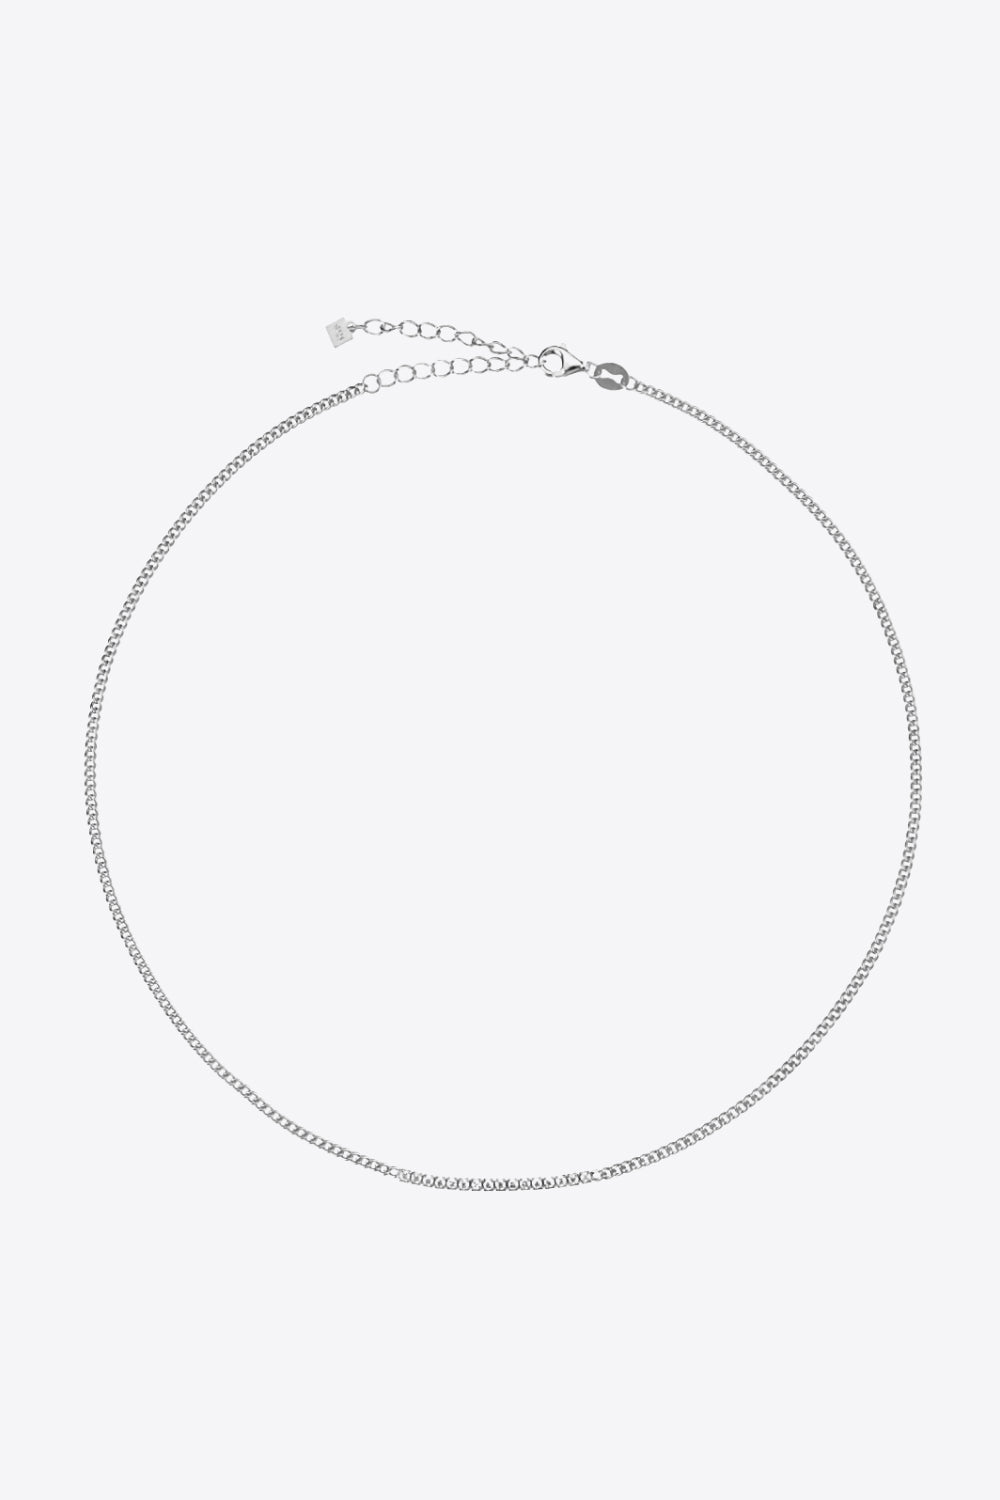 925 Sterling Silver Choker Necklace - Necklaces - FITGGINS